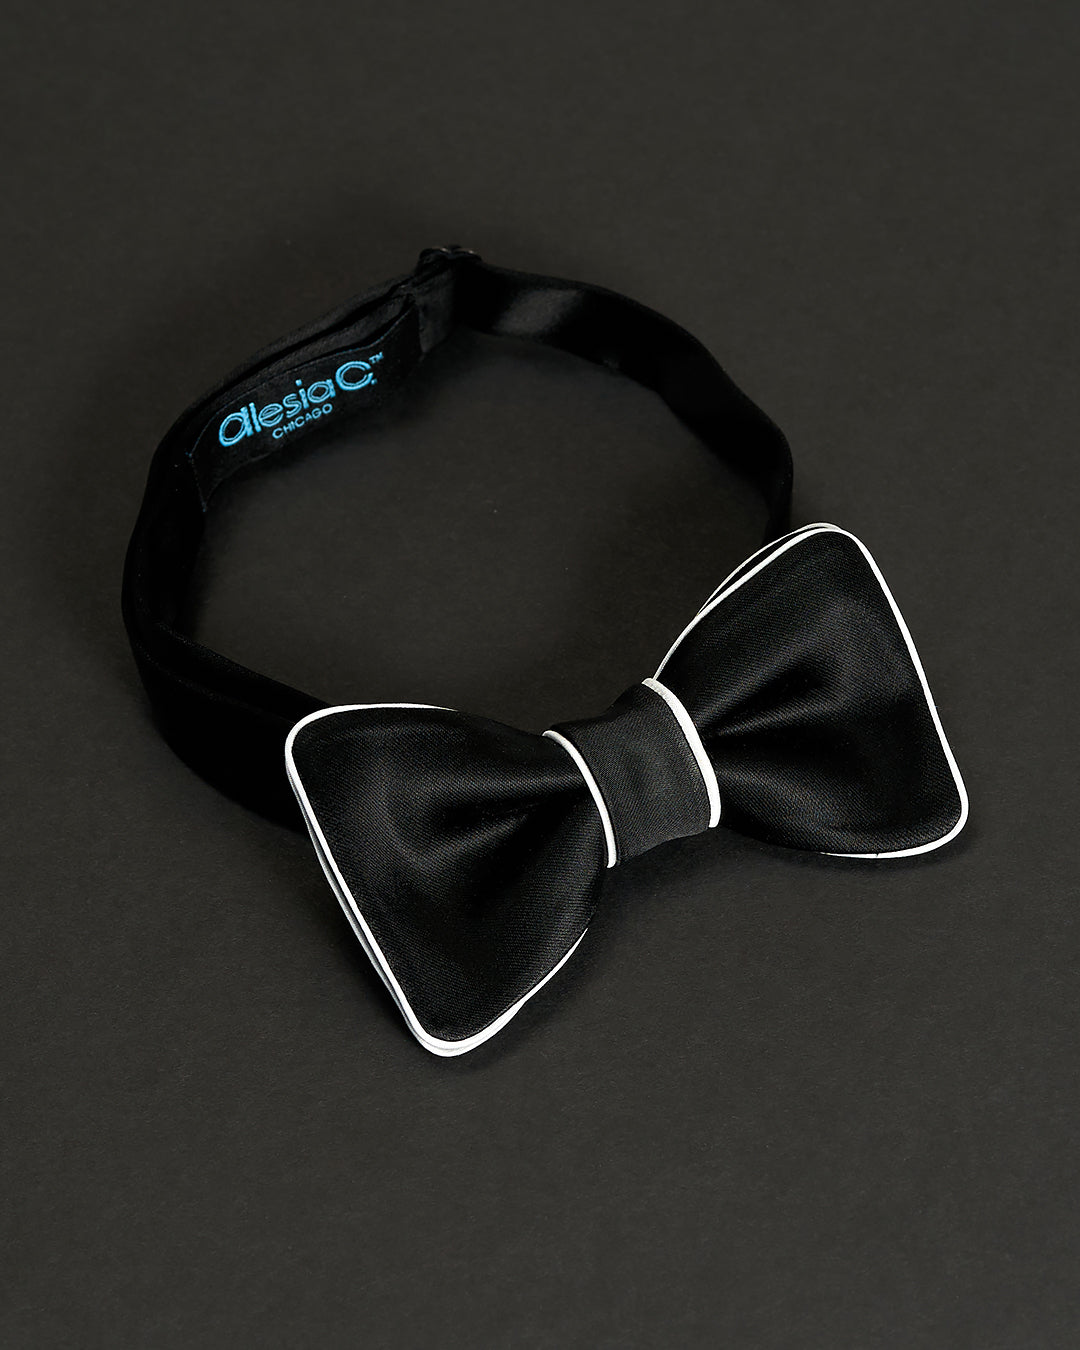 Great GATSBY Black White Bow Tie Limited Edition by Alesia Chaika